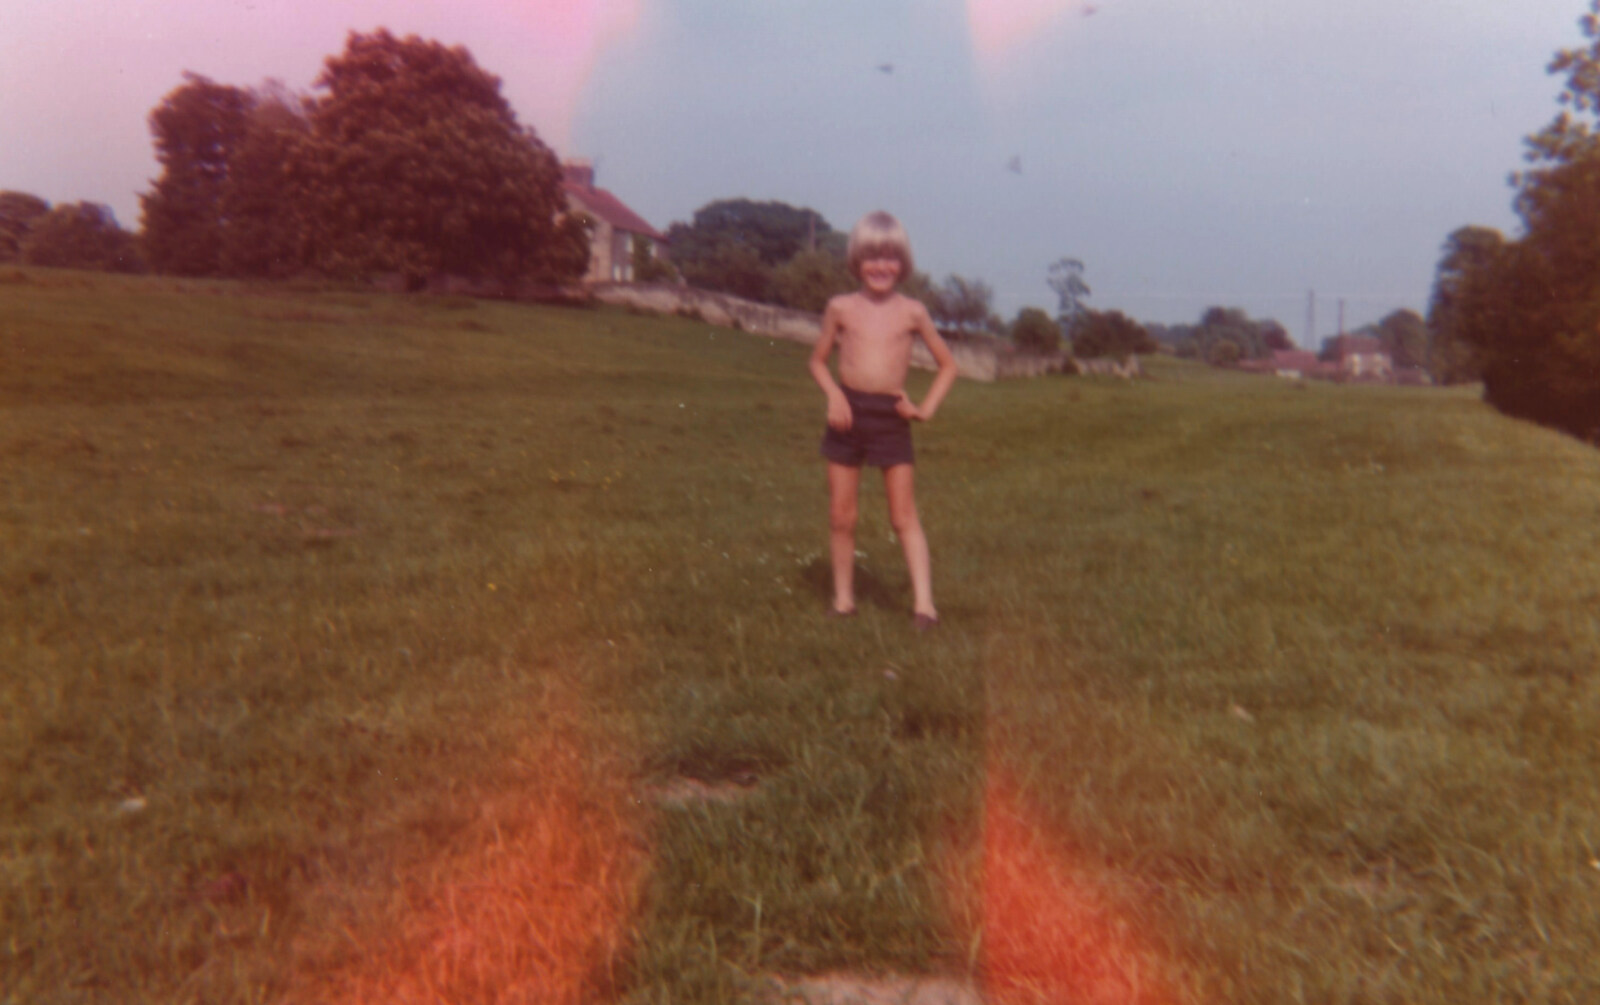 Stick boy in a field in Yorkshire from Family History: The 1970s, Timperley and Sandbach, Cheshire - 24th January 2020